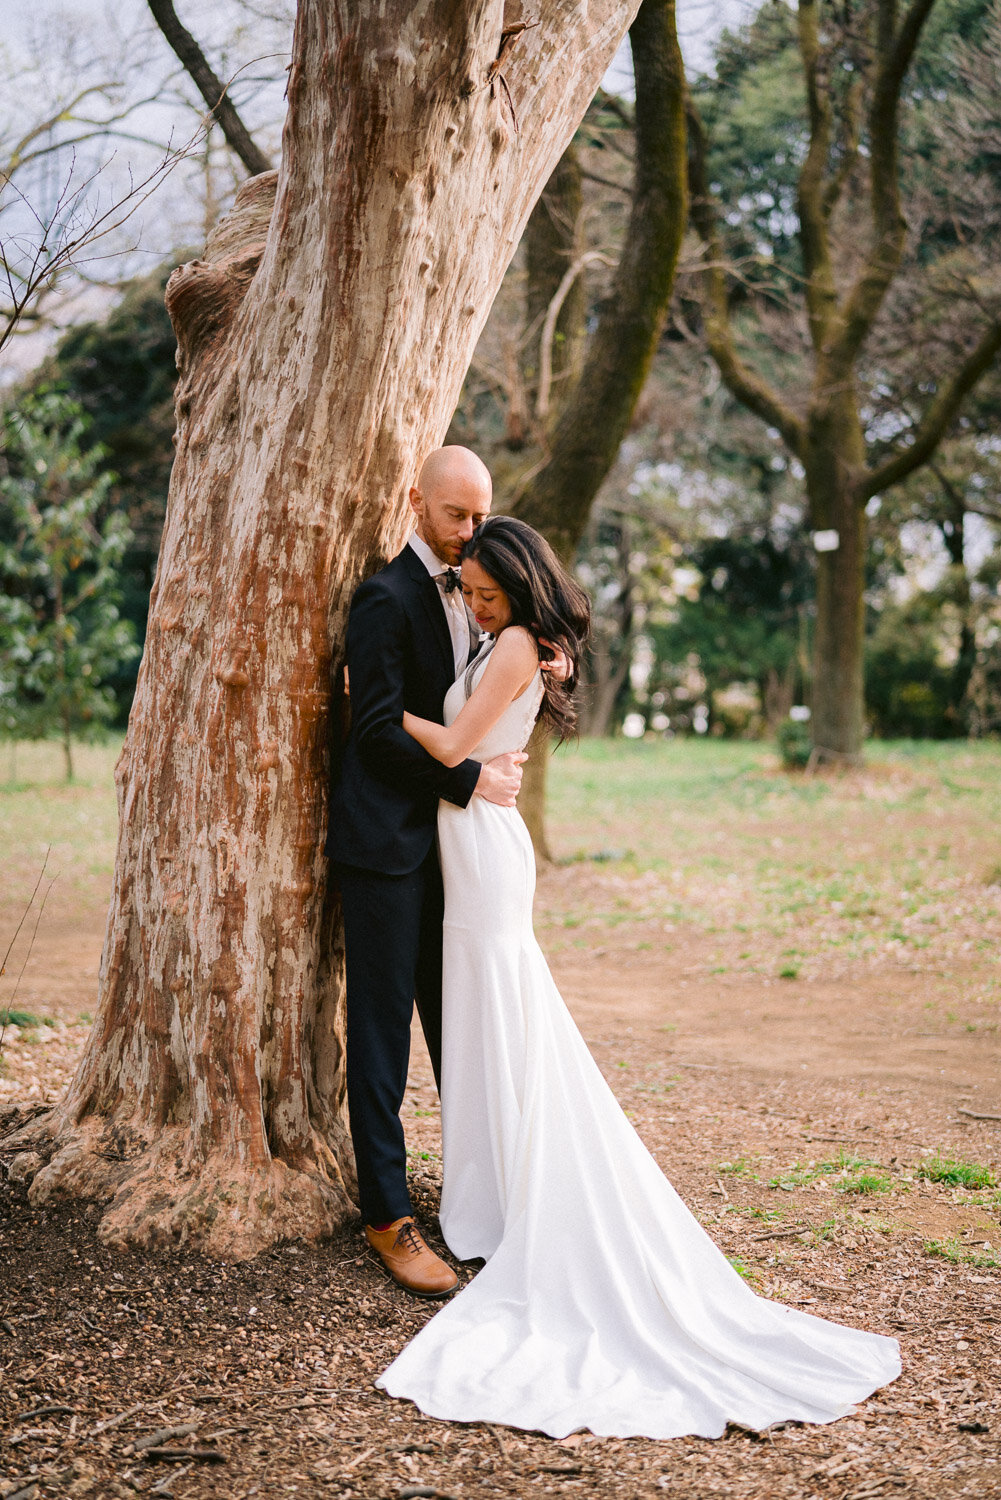 Natural and Candid Wedding Portrait in Tokyo, Japan